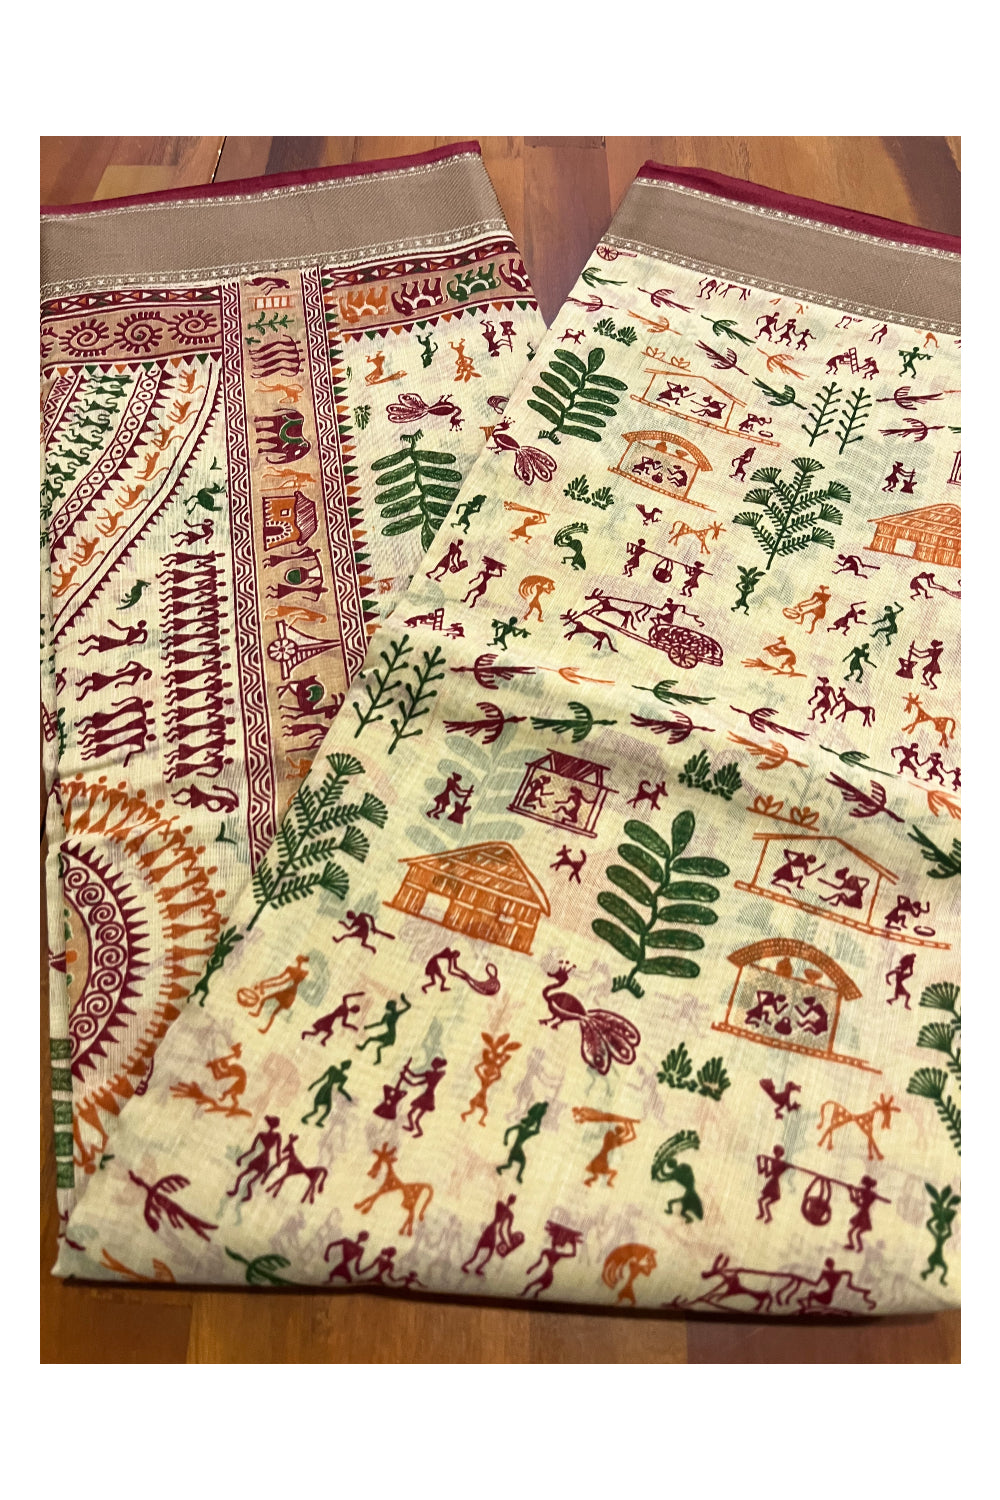 Southloom Cotton Light Brown Saree with Warli Art Printed Designs